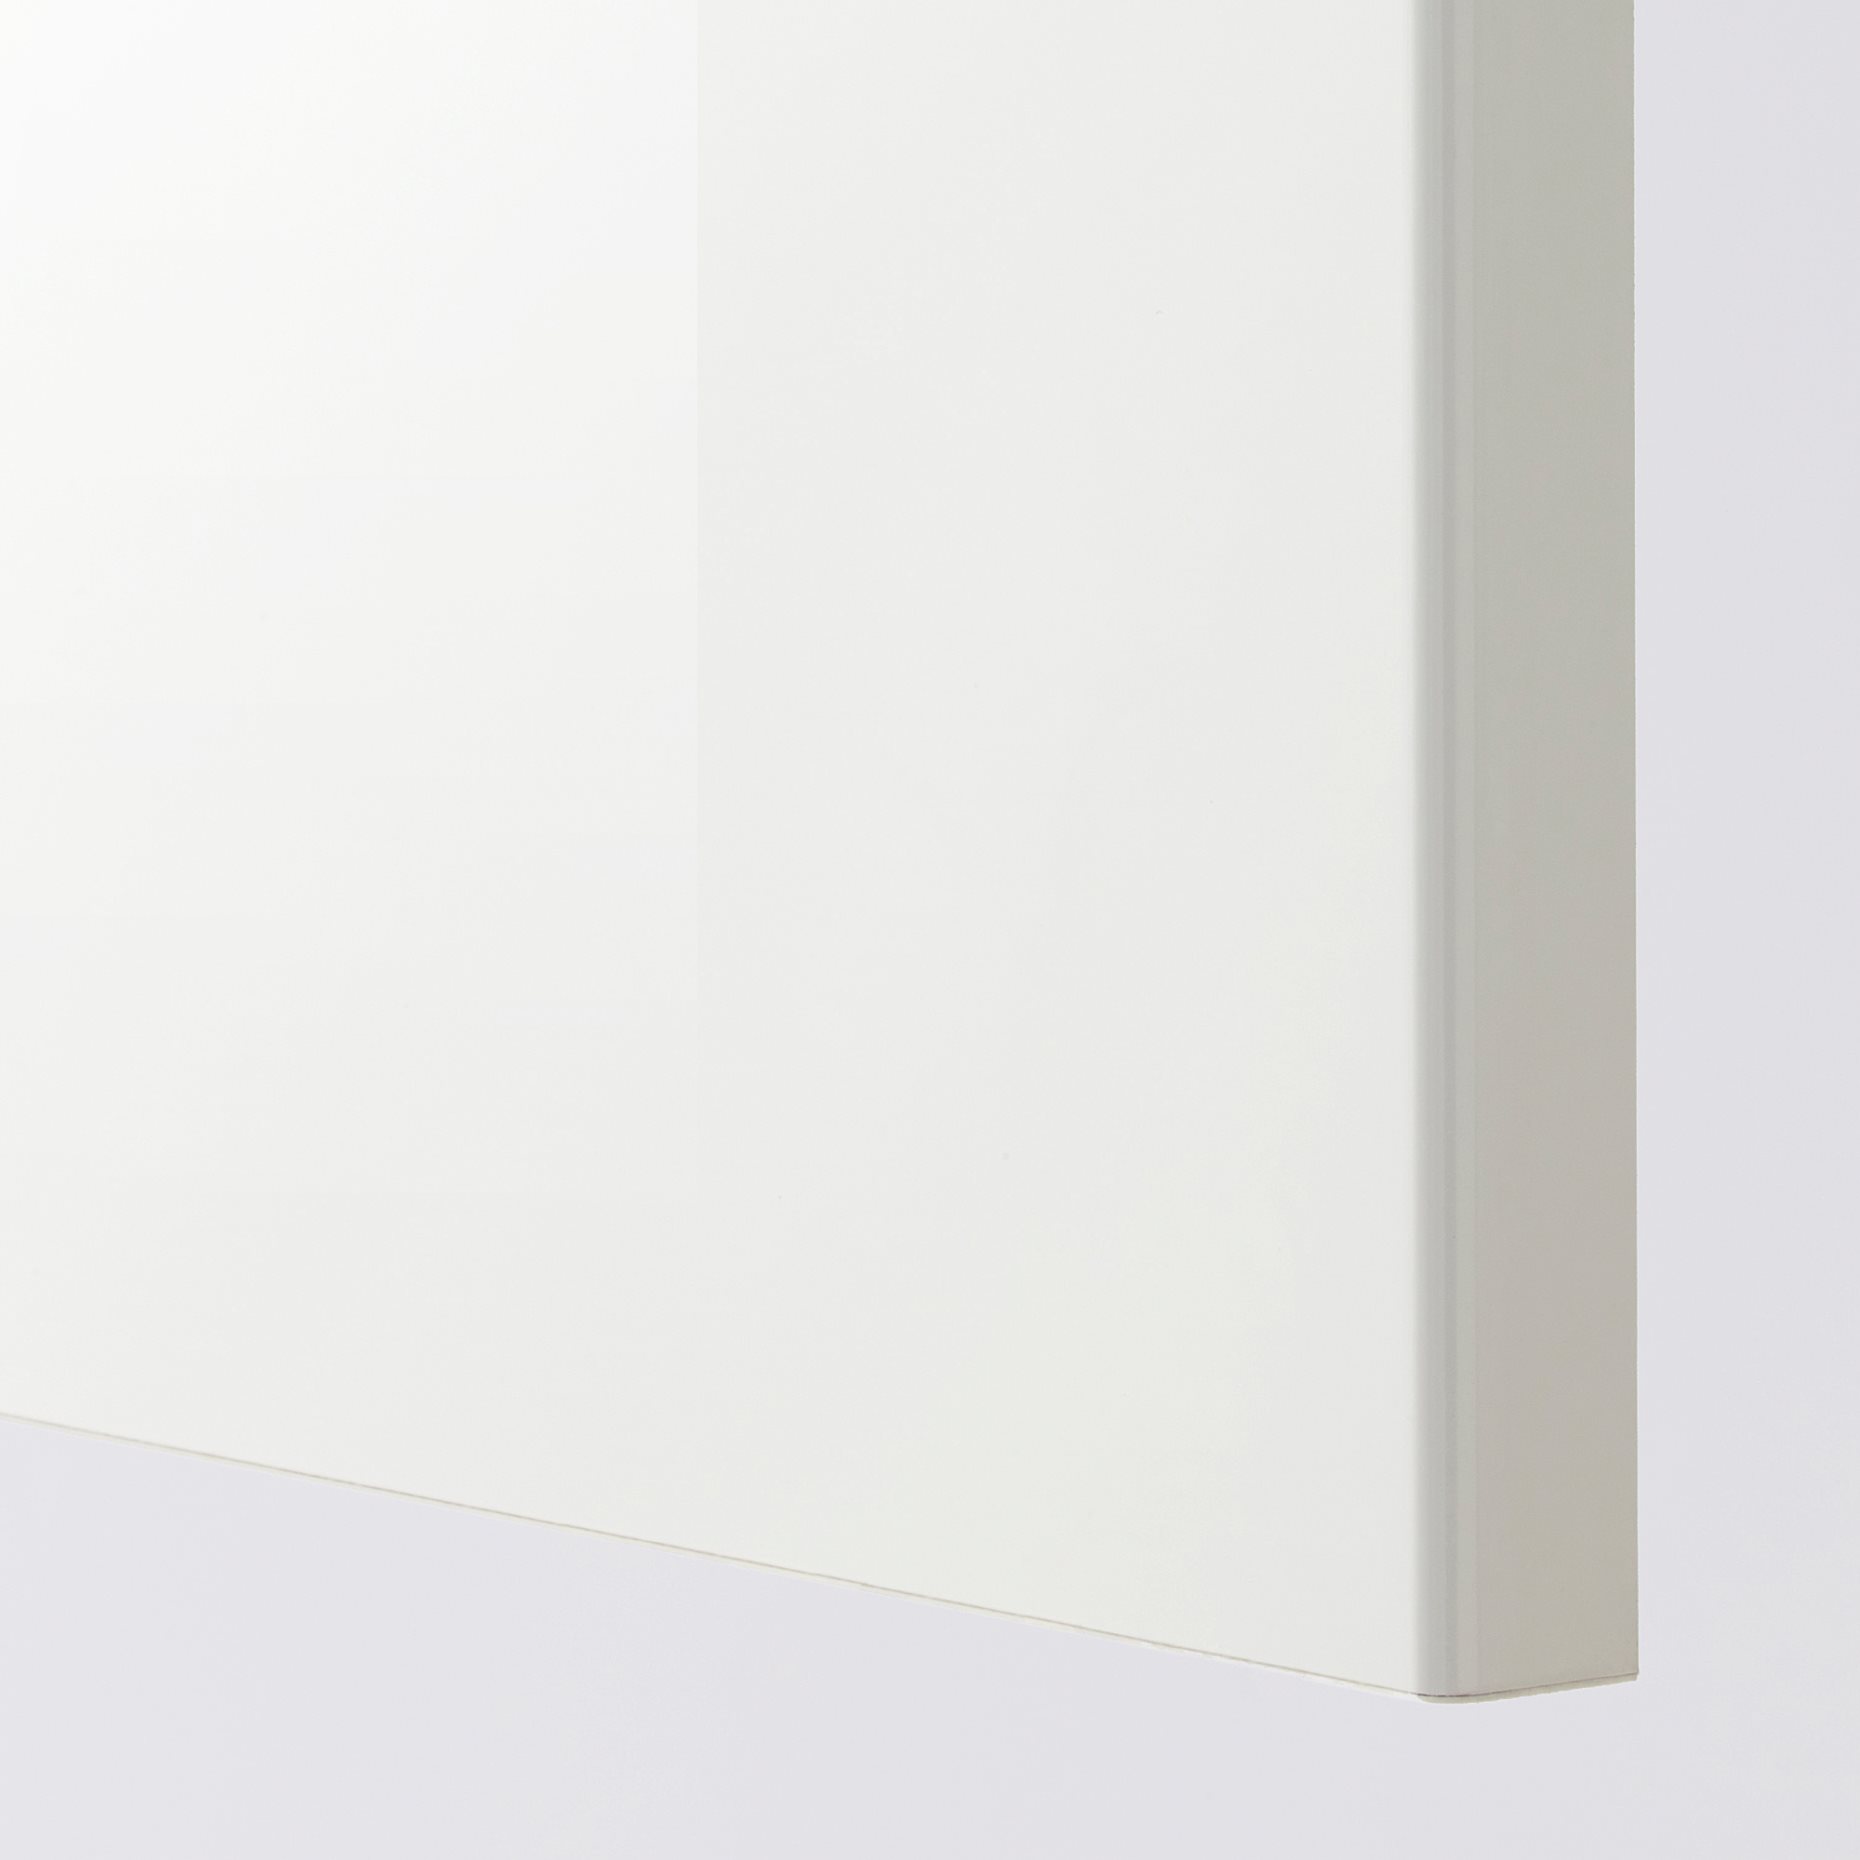 METOD, wall cabinet with shelves, 60x100 cm, 894.669.29